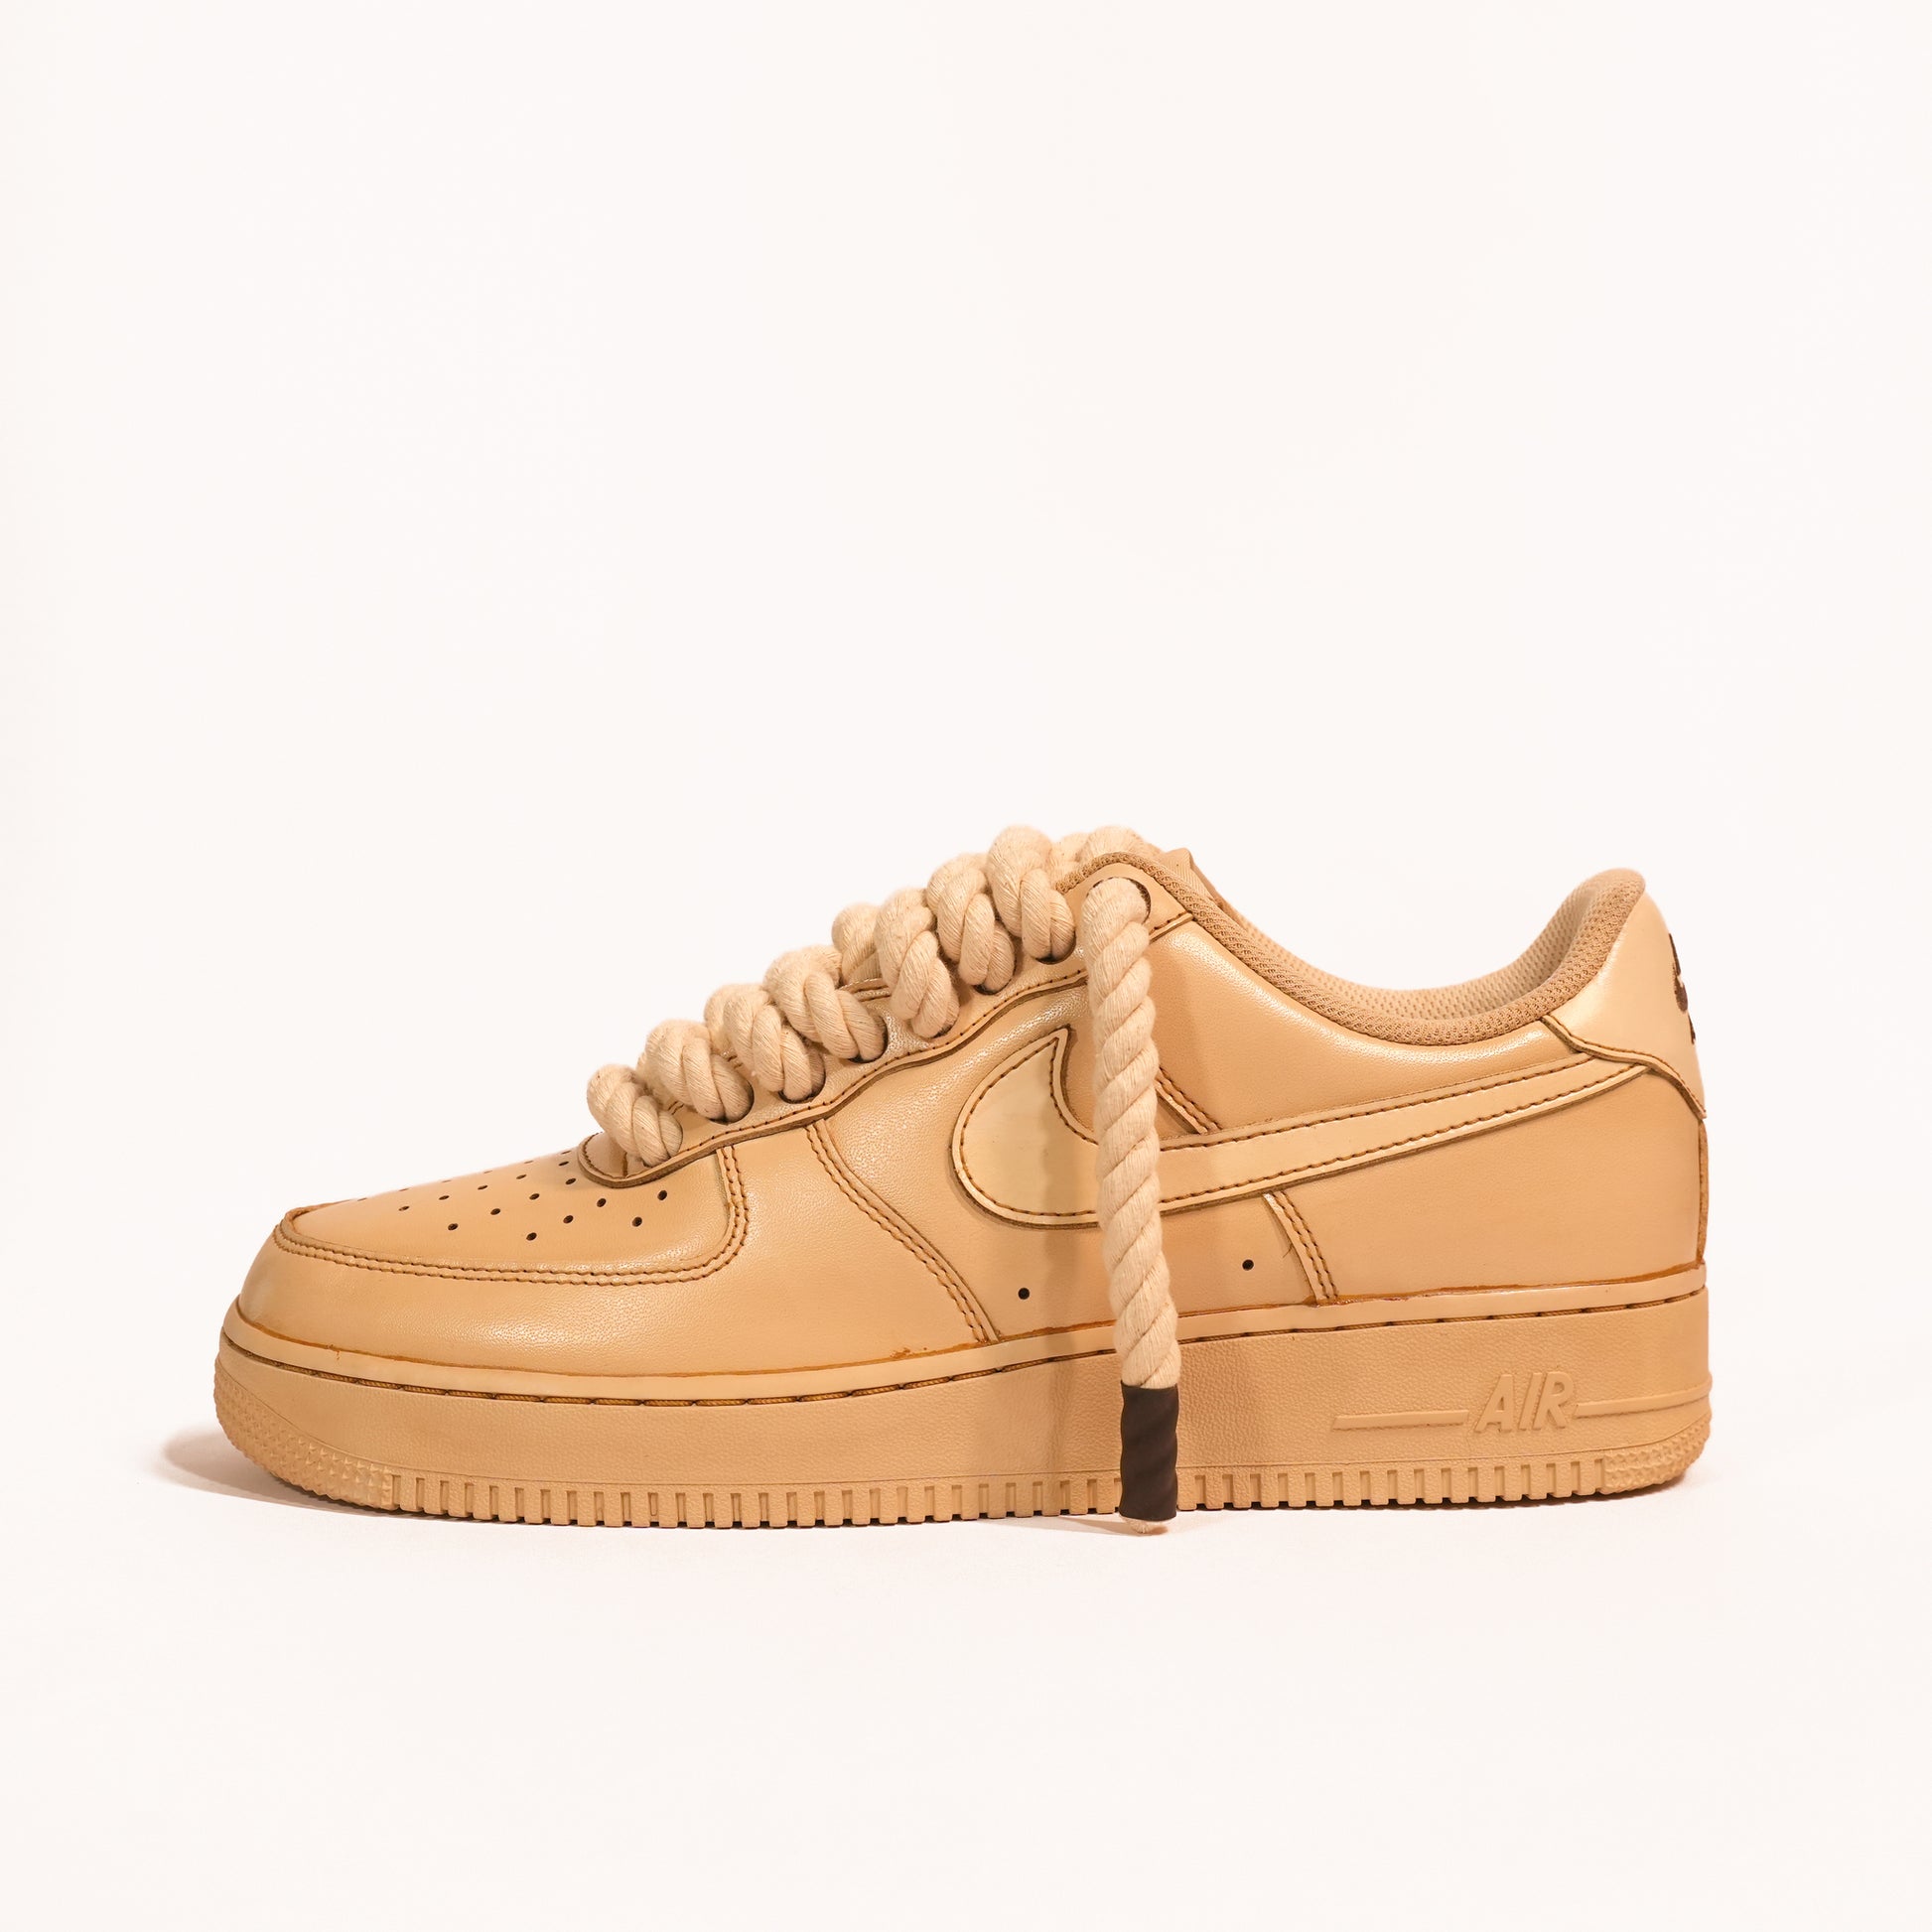 nike air force 1 dipped in coffee